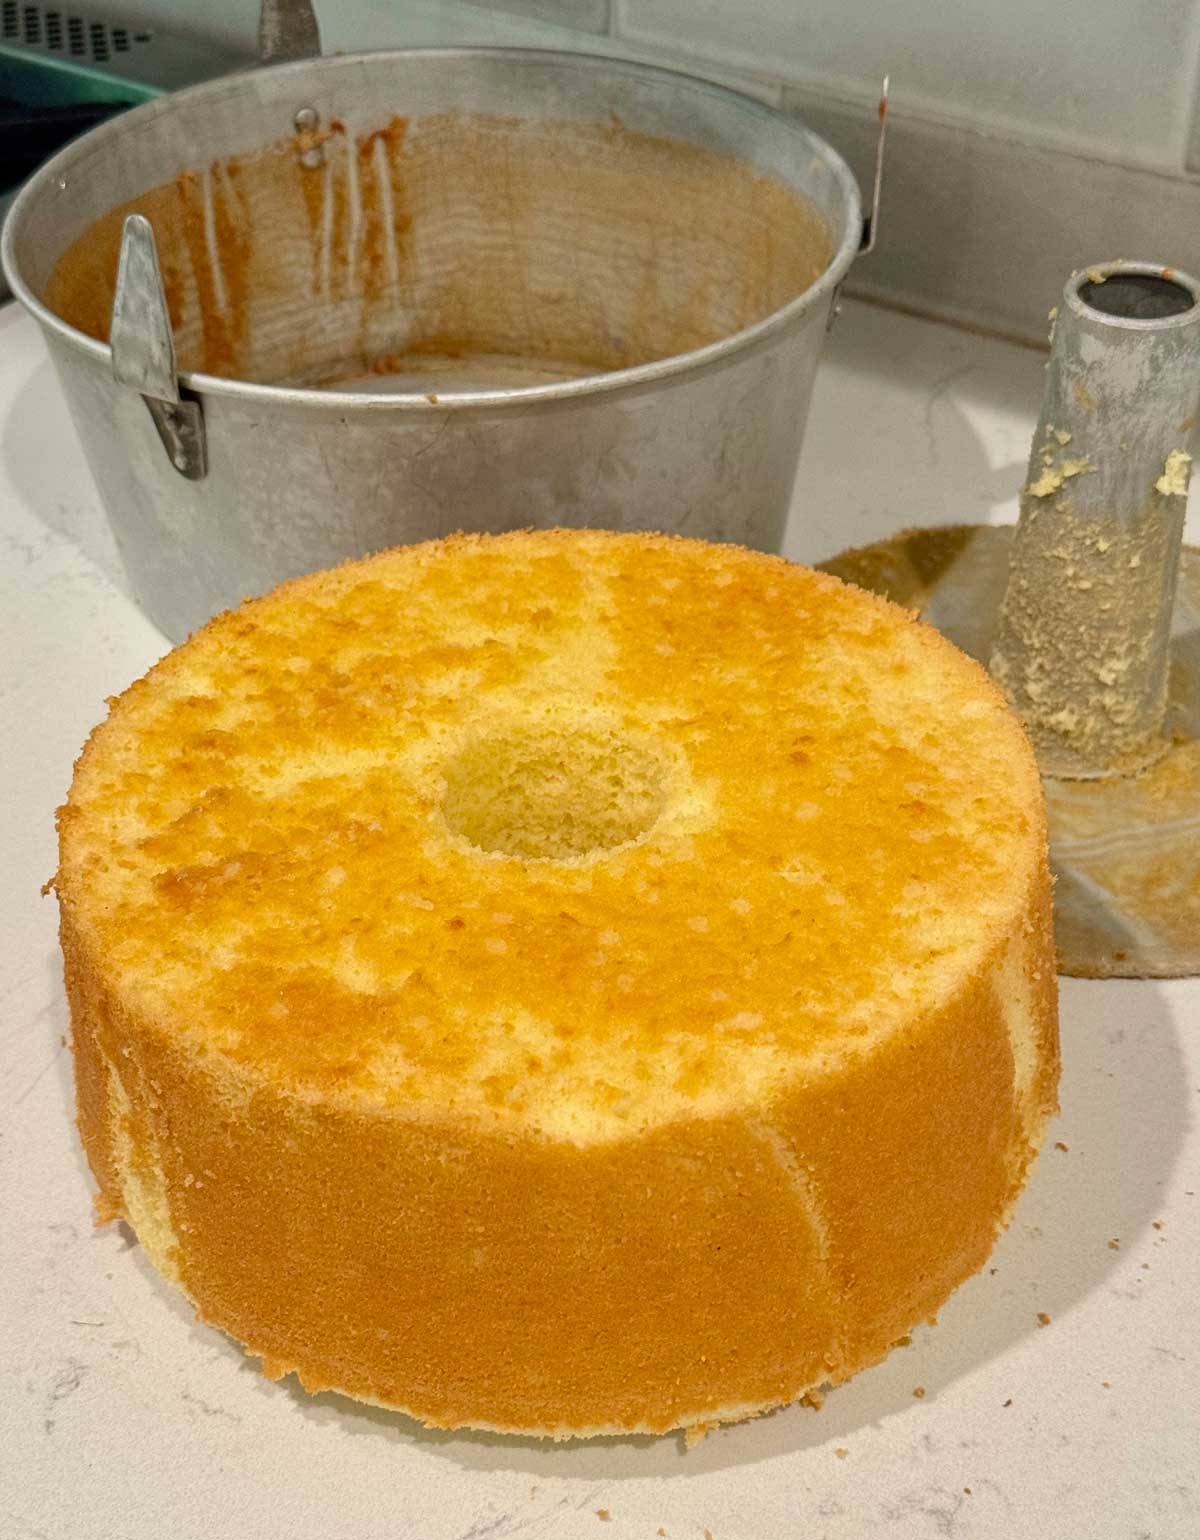 Chiffon cake turned out of the tube pan.